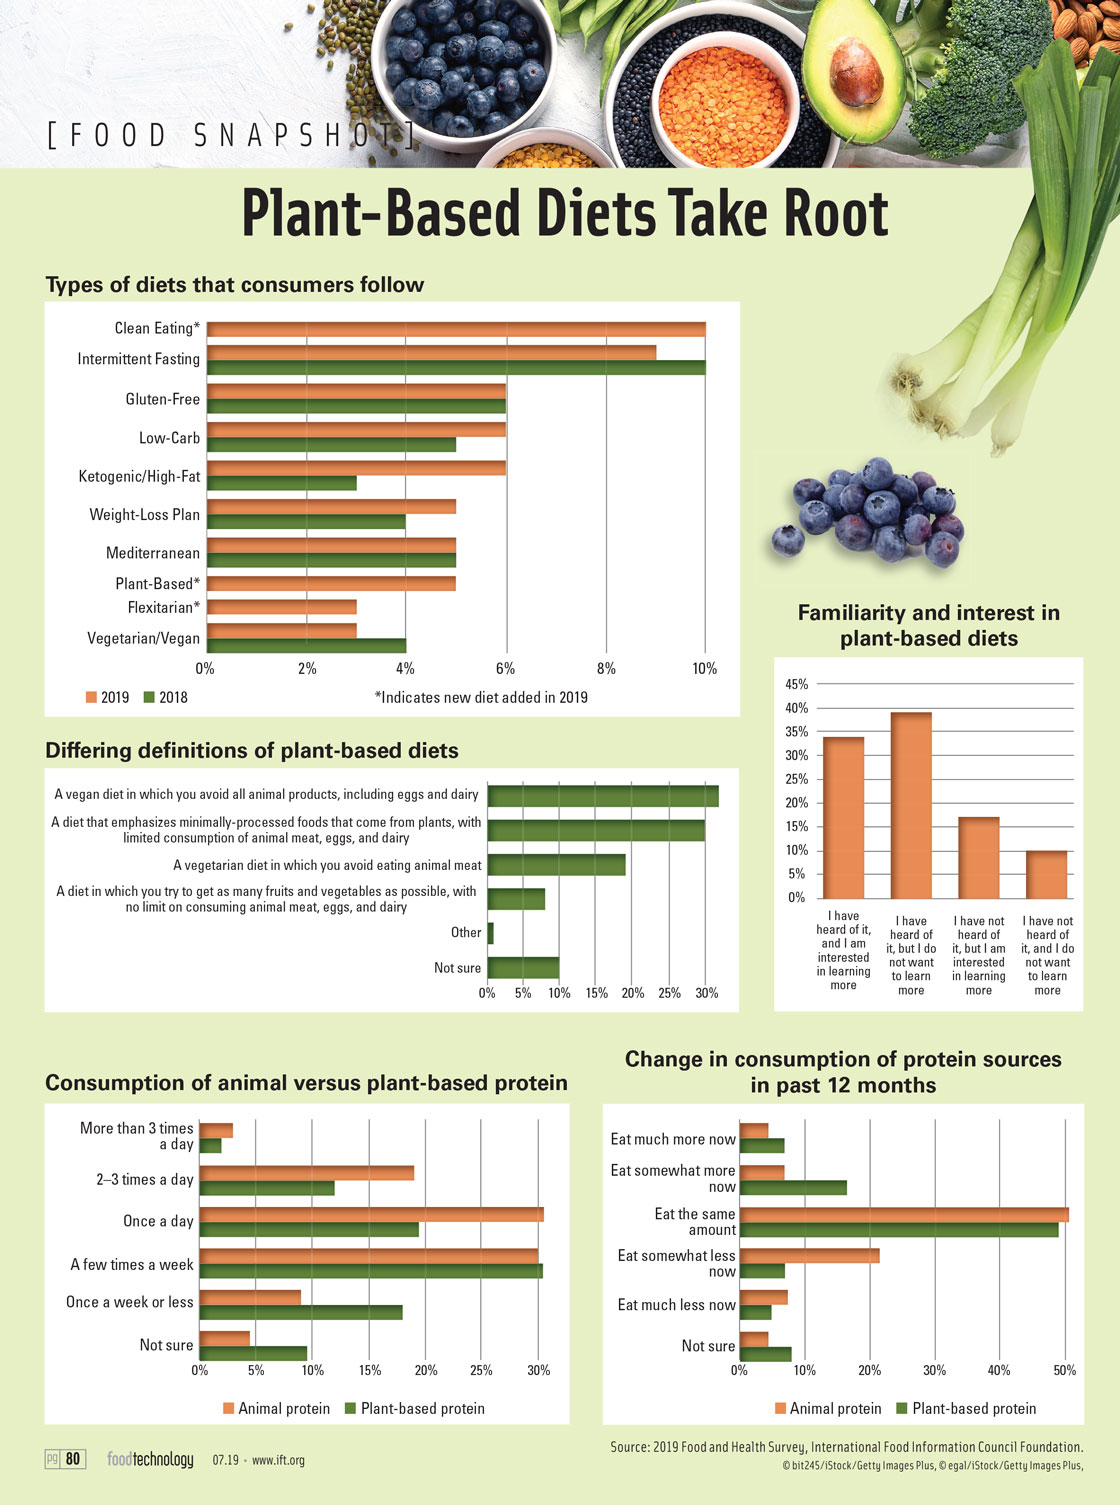 Plant-Based Diets Take Root. Source: 2019 Food and Health Survey, International Food Information Council Foundation.